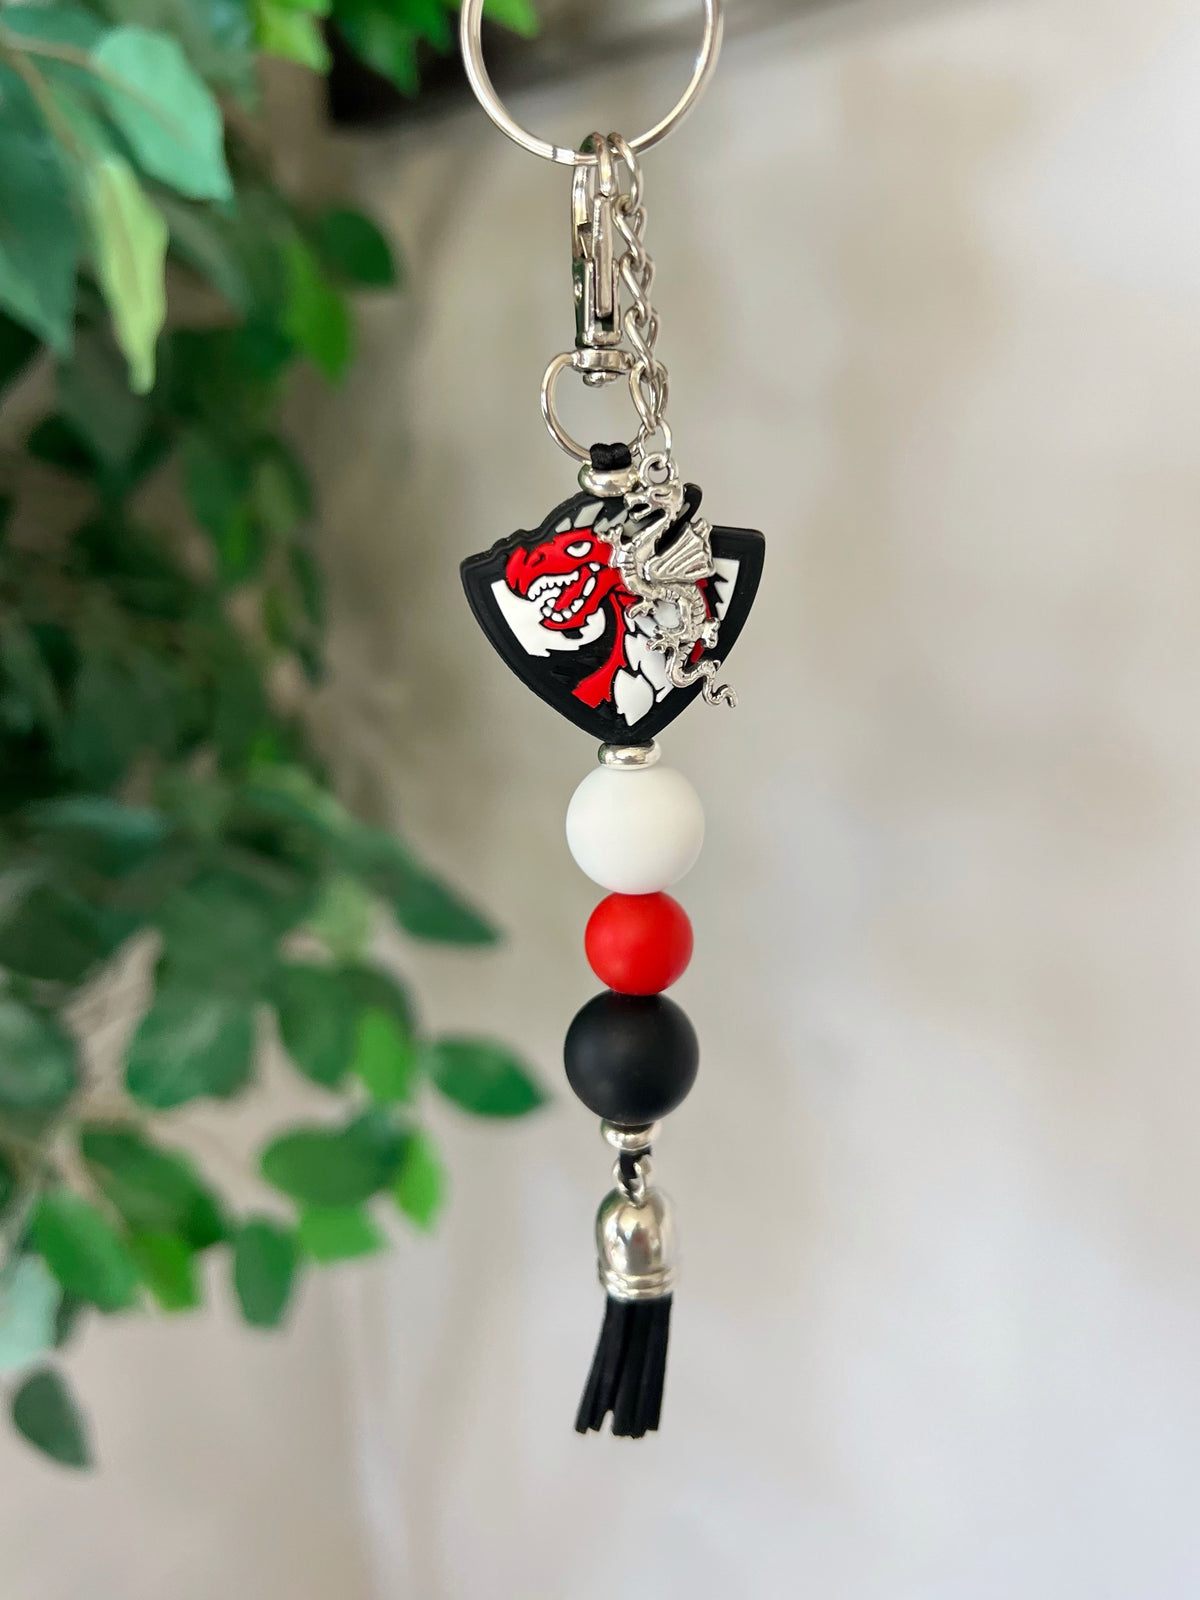 Customize your own Keychain or Silicone Bead Accessory | Choose Colors, Charms, Tassels, etc.